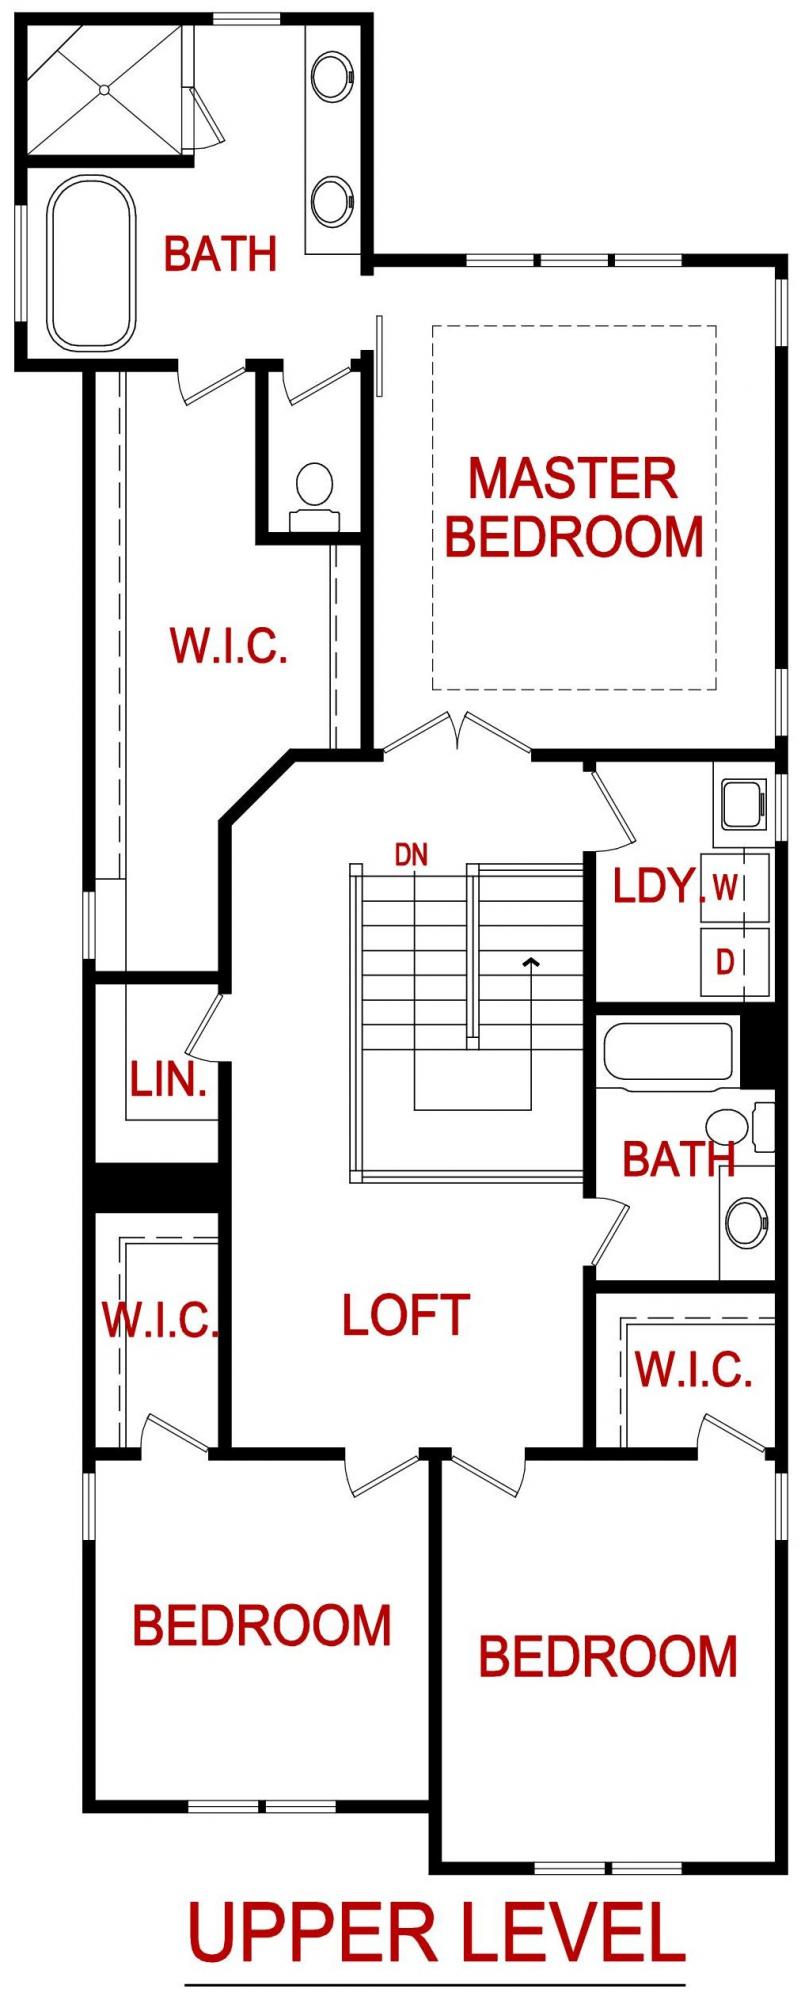 Upper level floor plan of the sequoia model from lambie homes